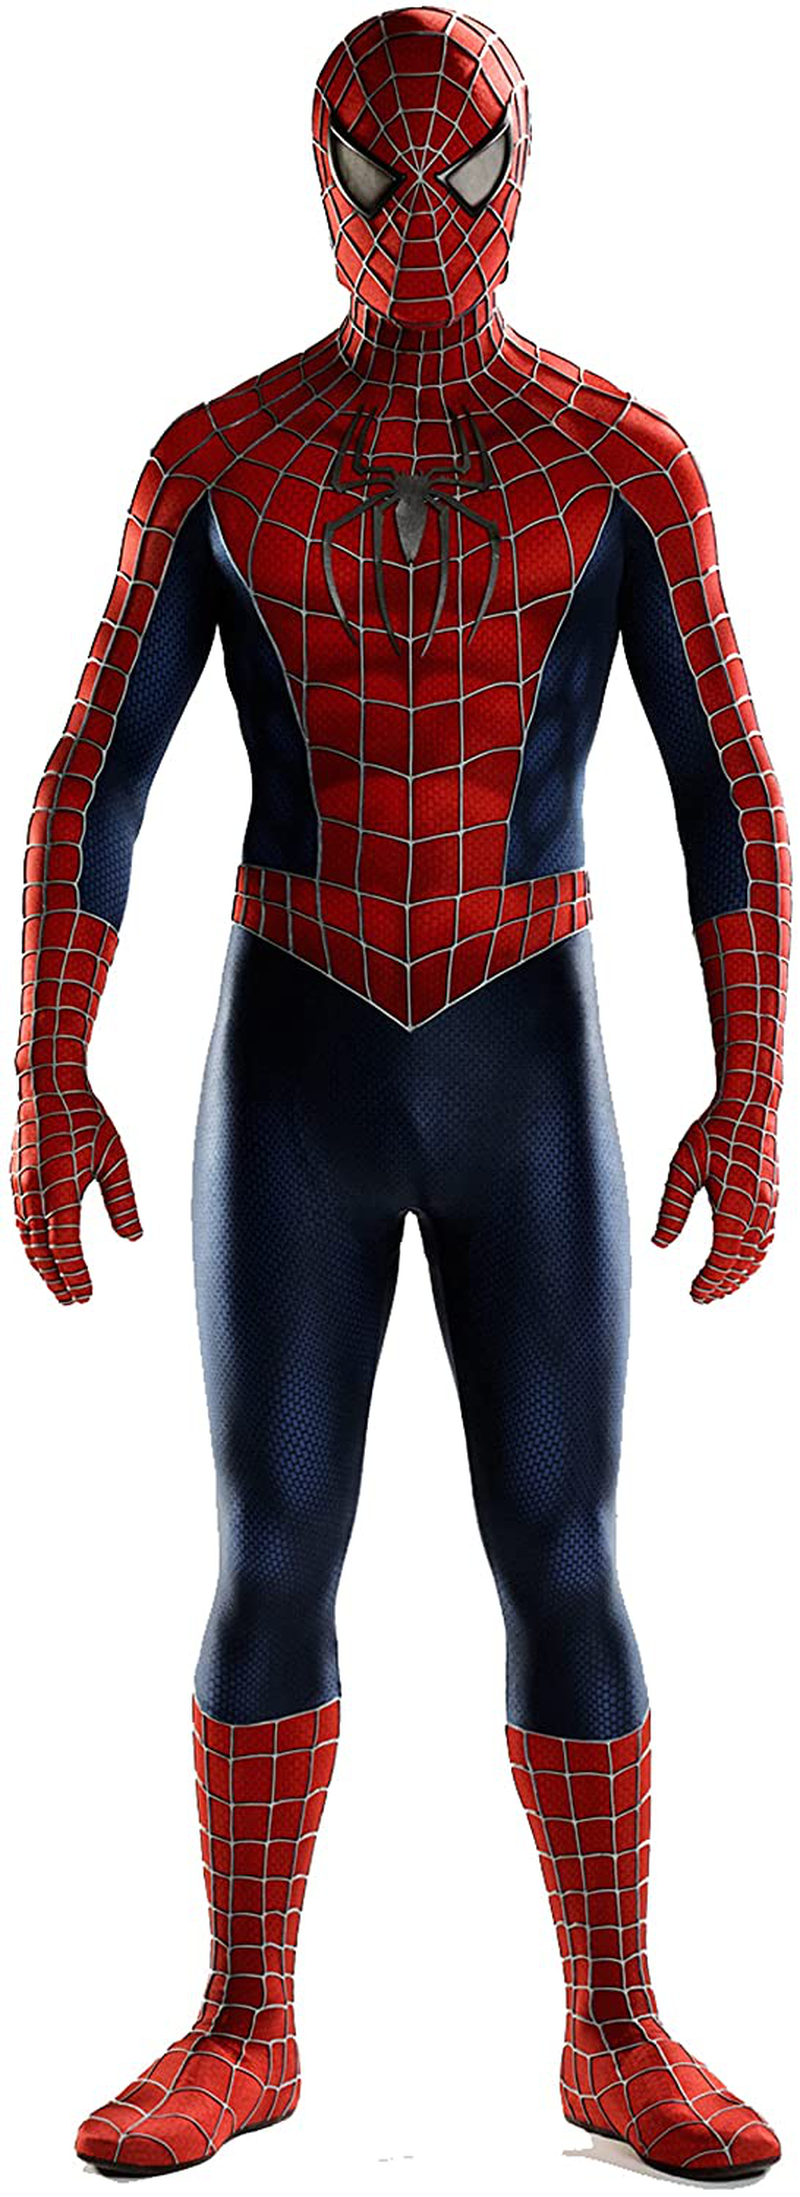 JoyRodgers Superhero Bodysuit 3D Style Spandex Zentai Halloween Cosplay Costume Apparel & Accessories > Costumes & Accessories > Costumes JoyRodgers Blue and Red Kids-S(Height:43-46 inches) 